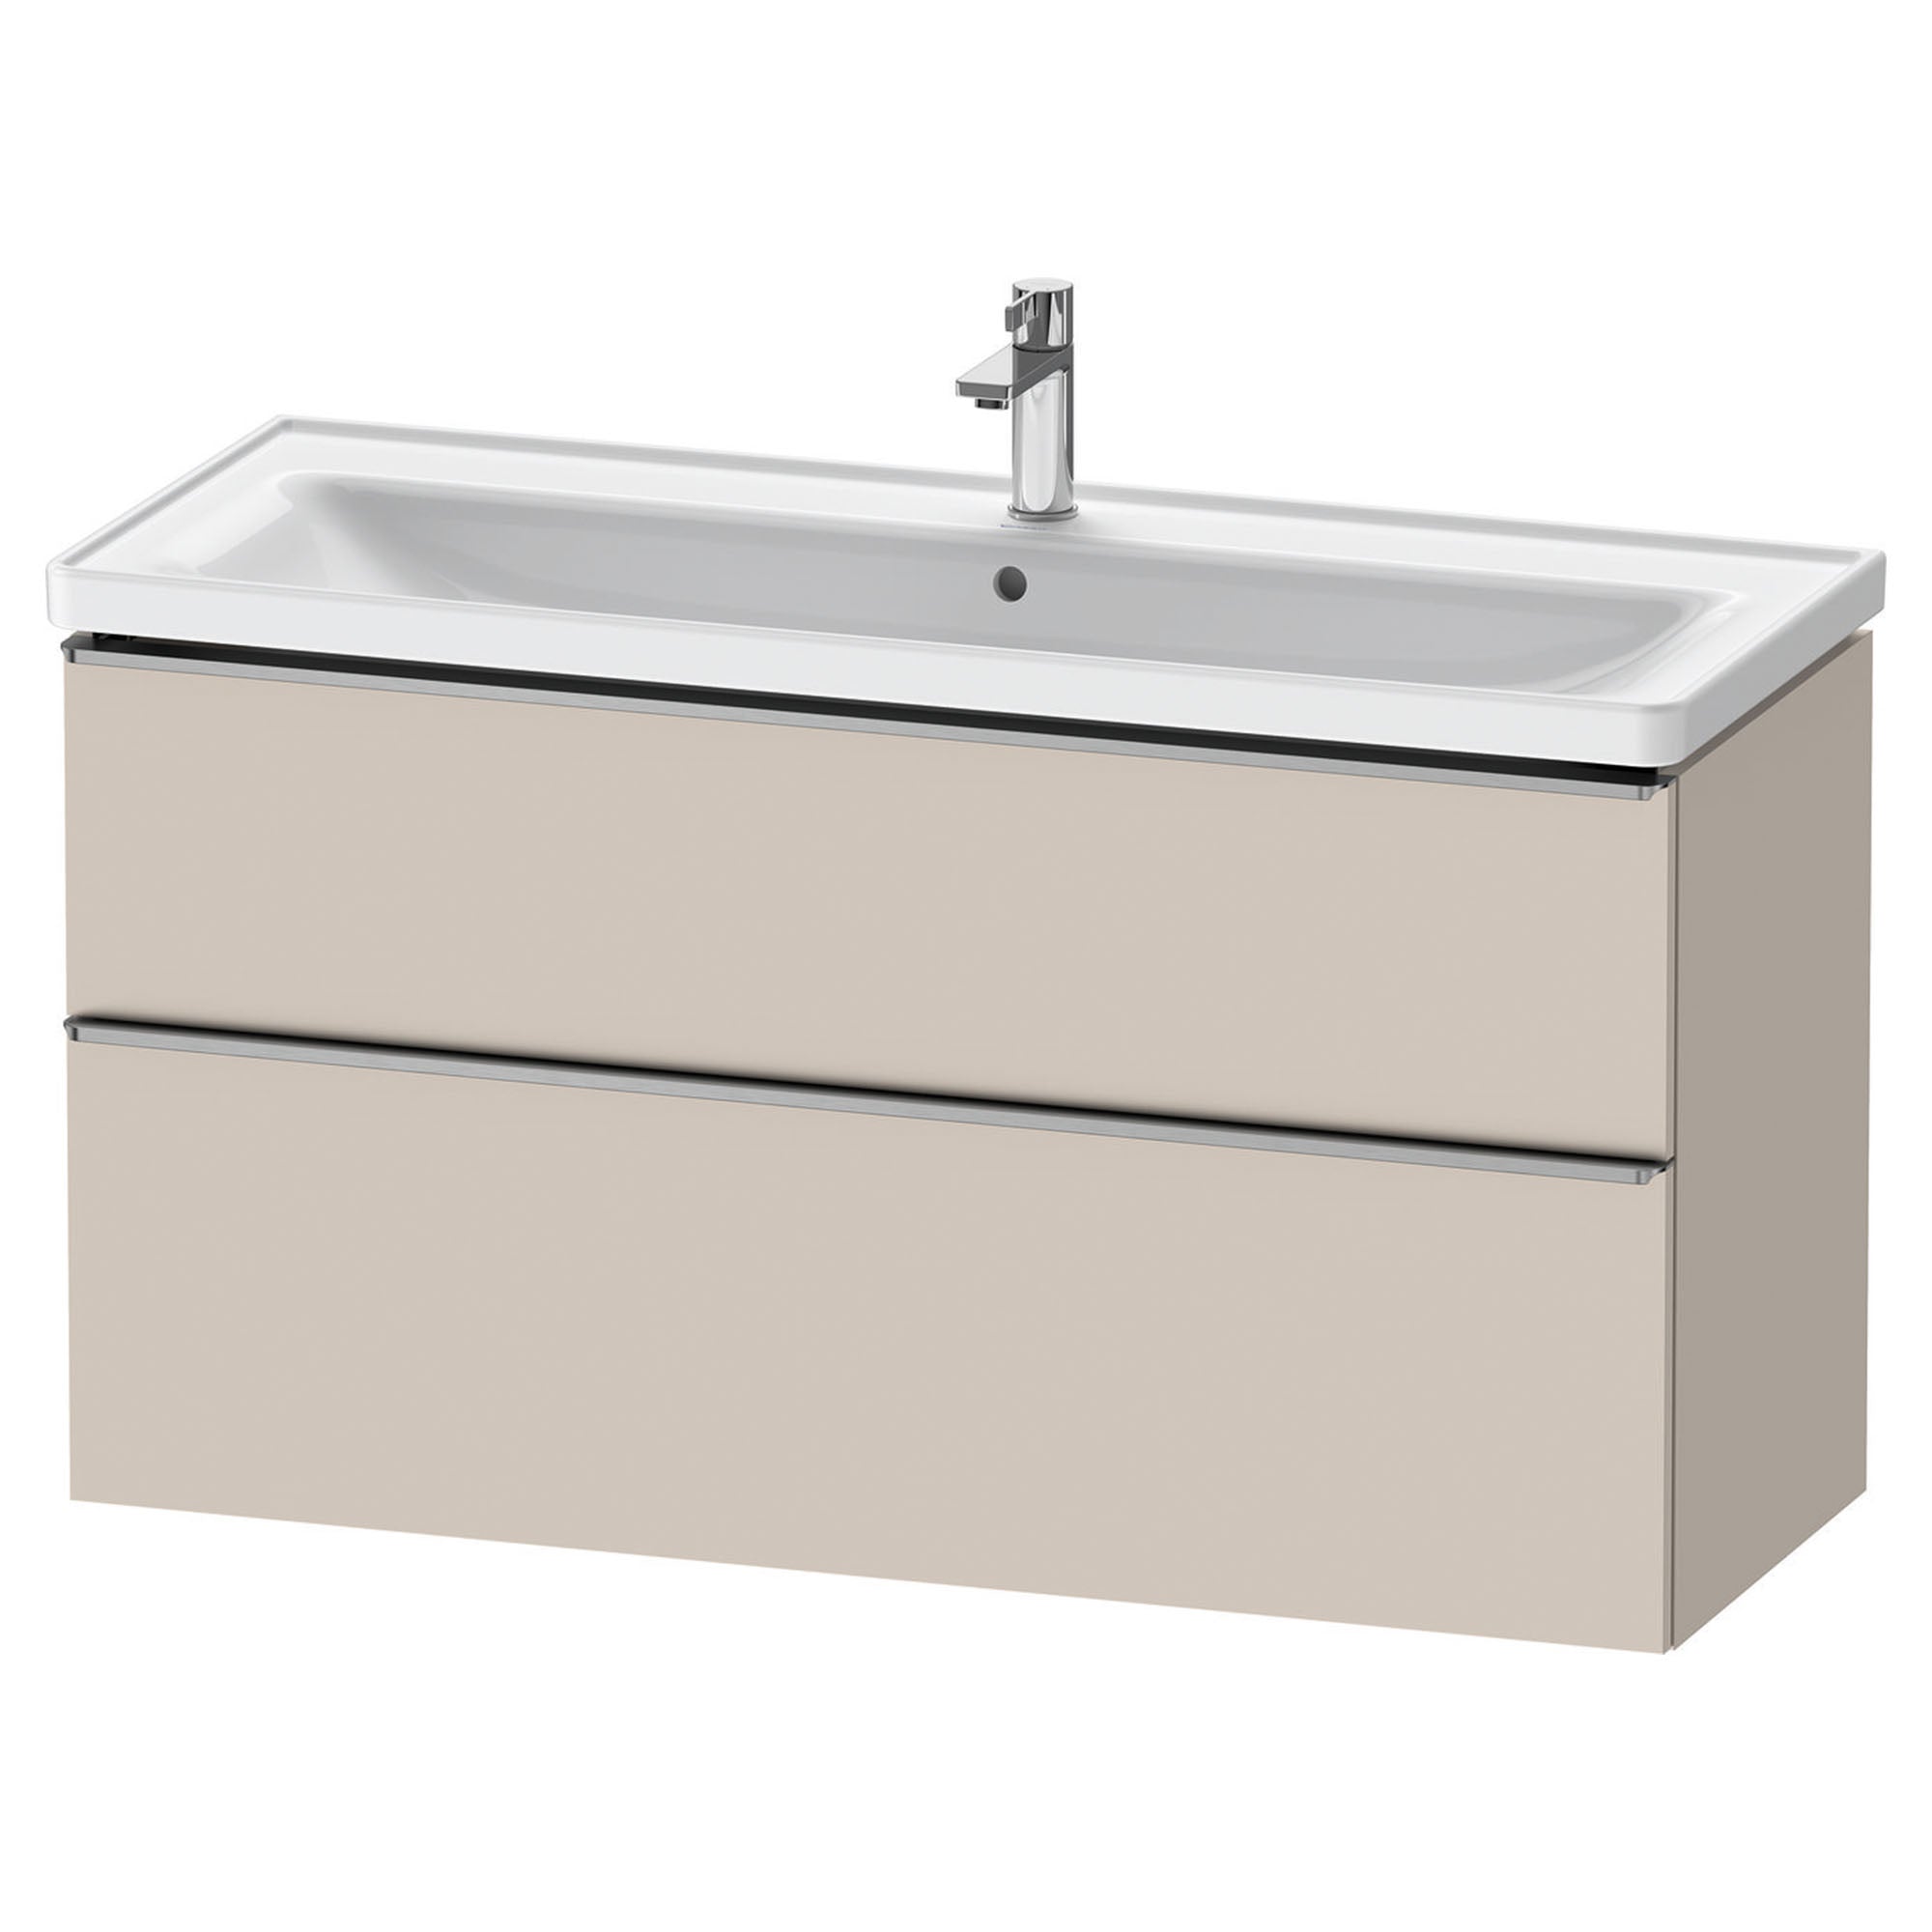 duravit d-neo 1200mm wall mounted vanity unit with d-neo basin taupe stainless steel handles